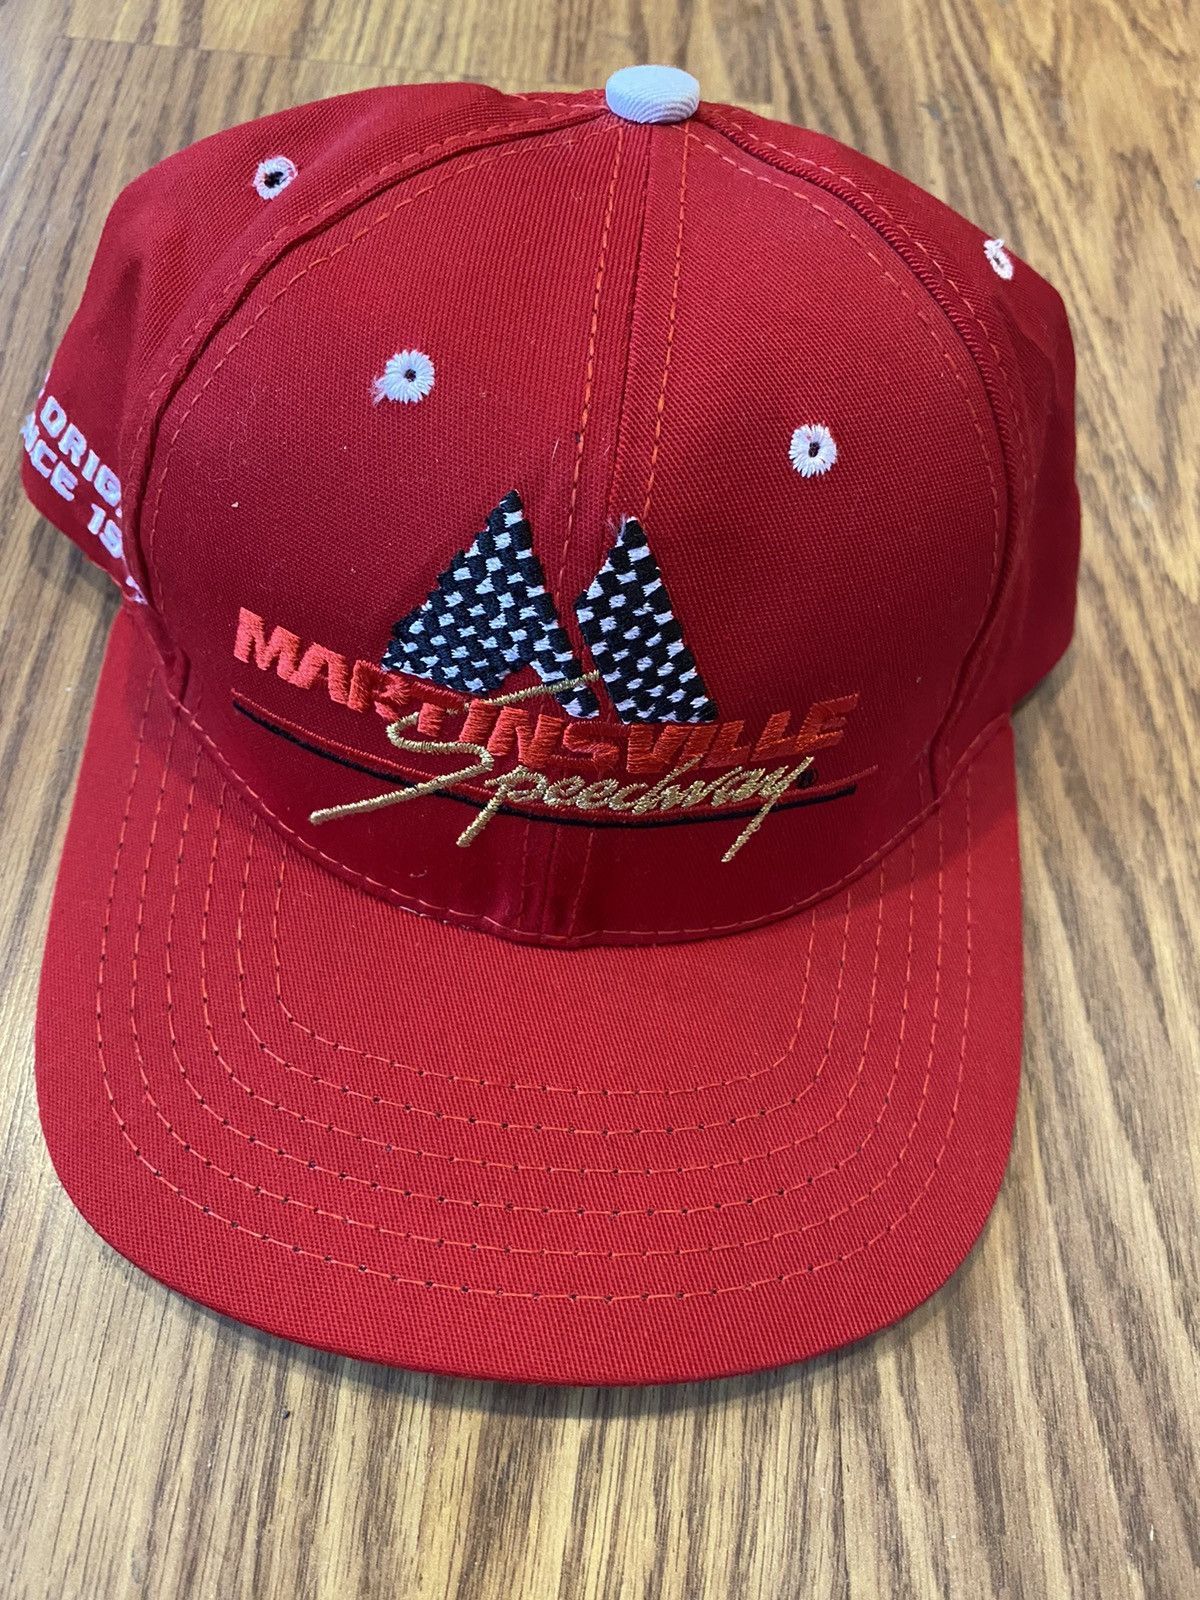 Racing Vintage martinsville speedway racing nascar snapback hat Size ONE SIZE - 1 Preview